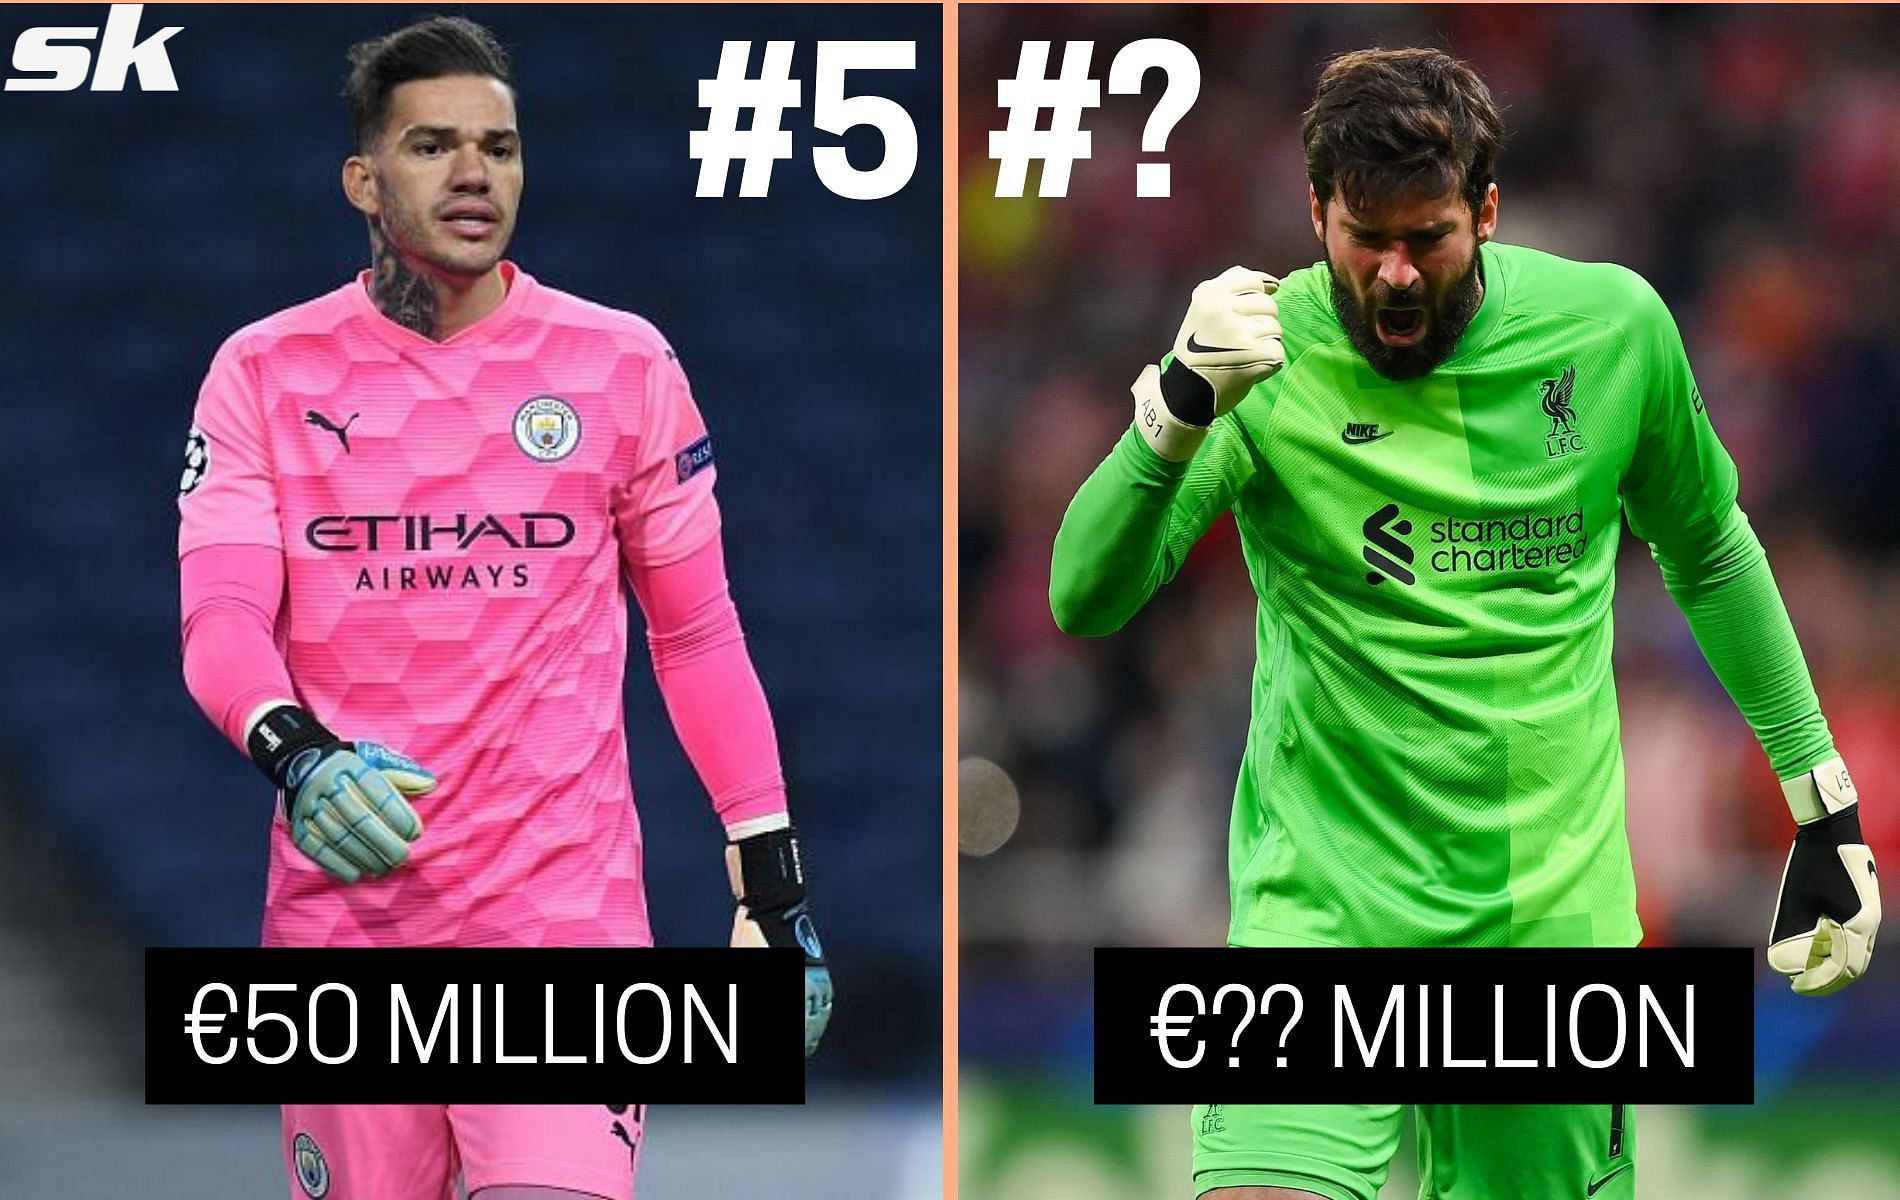 Who are the top 5 keepers according to market valuation? (Image via Sportskeeda)